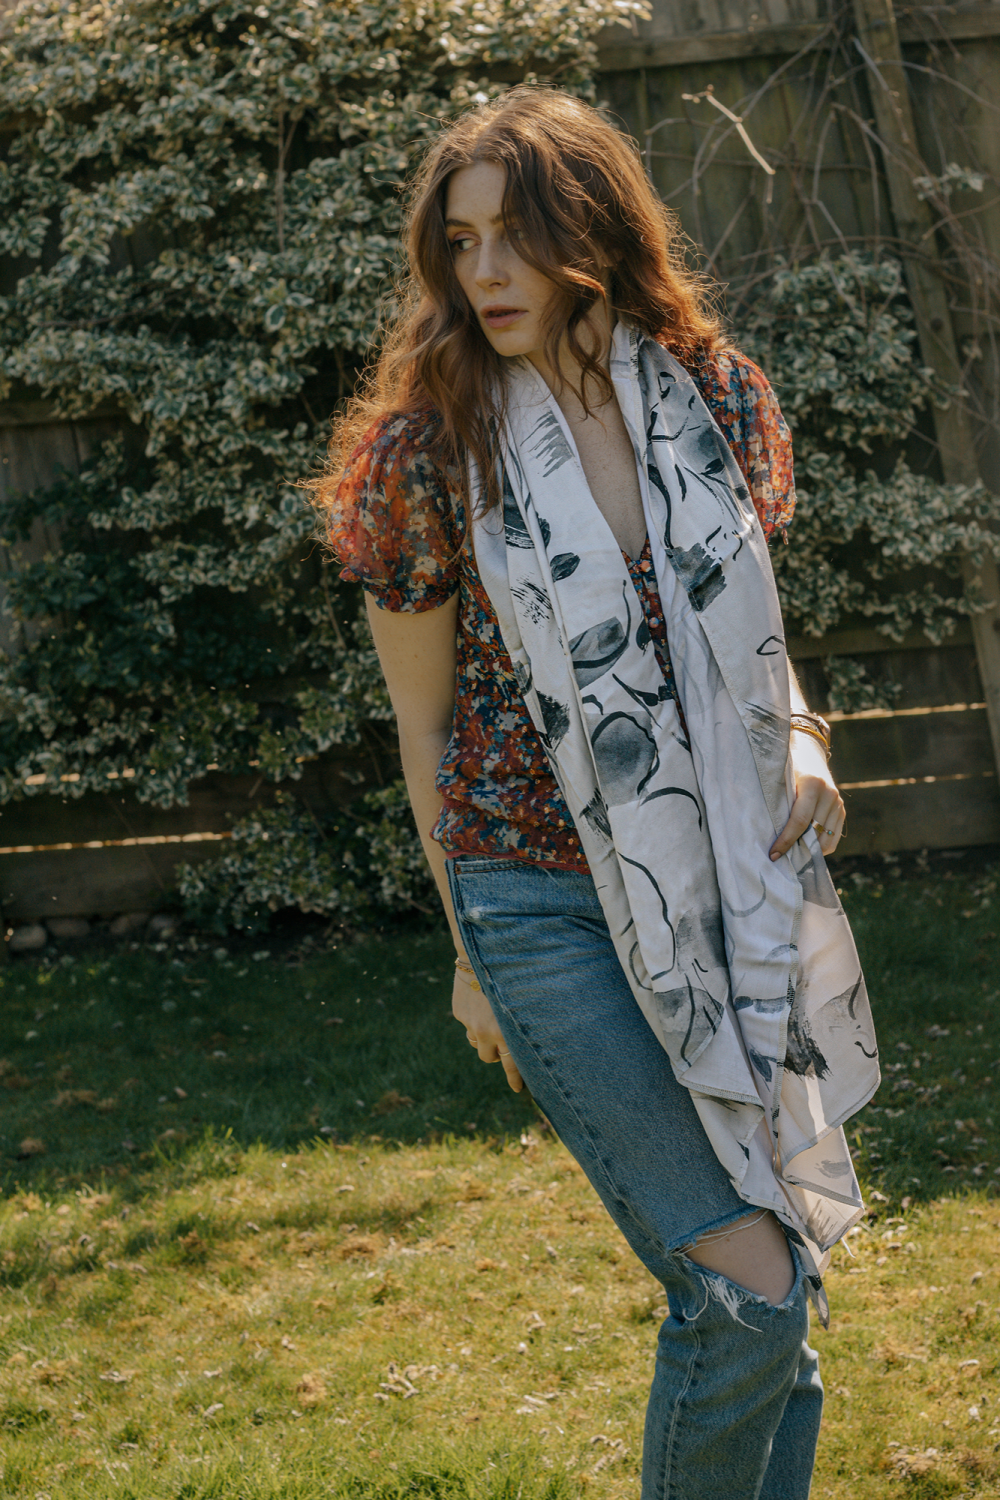 A person in their garden modelling a white scarf with a dark floral pattern